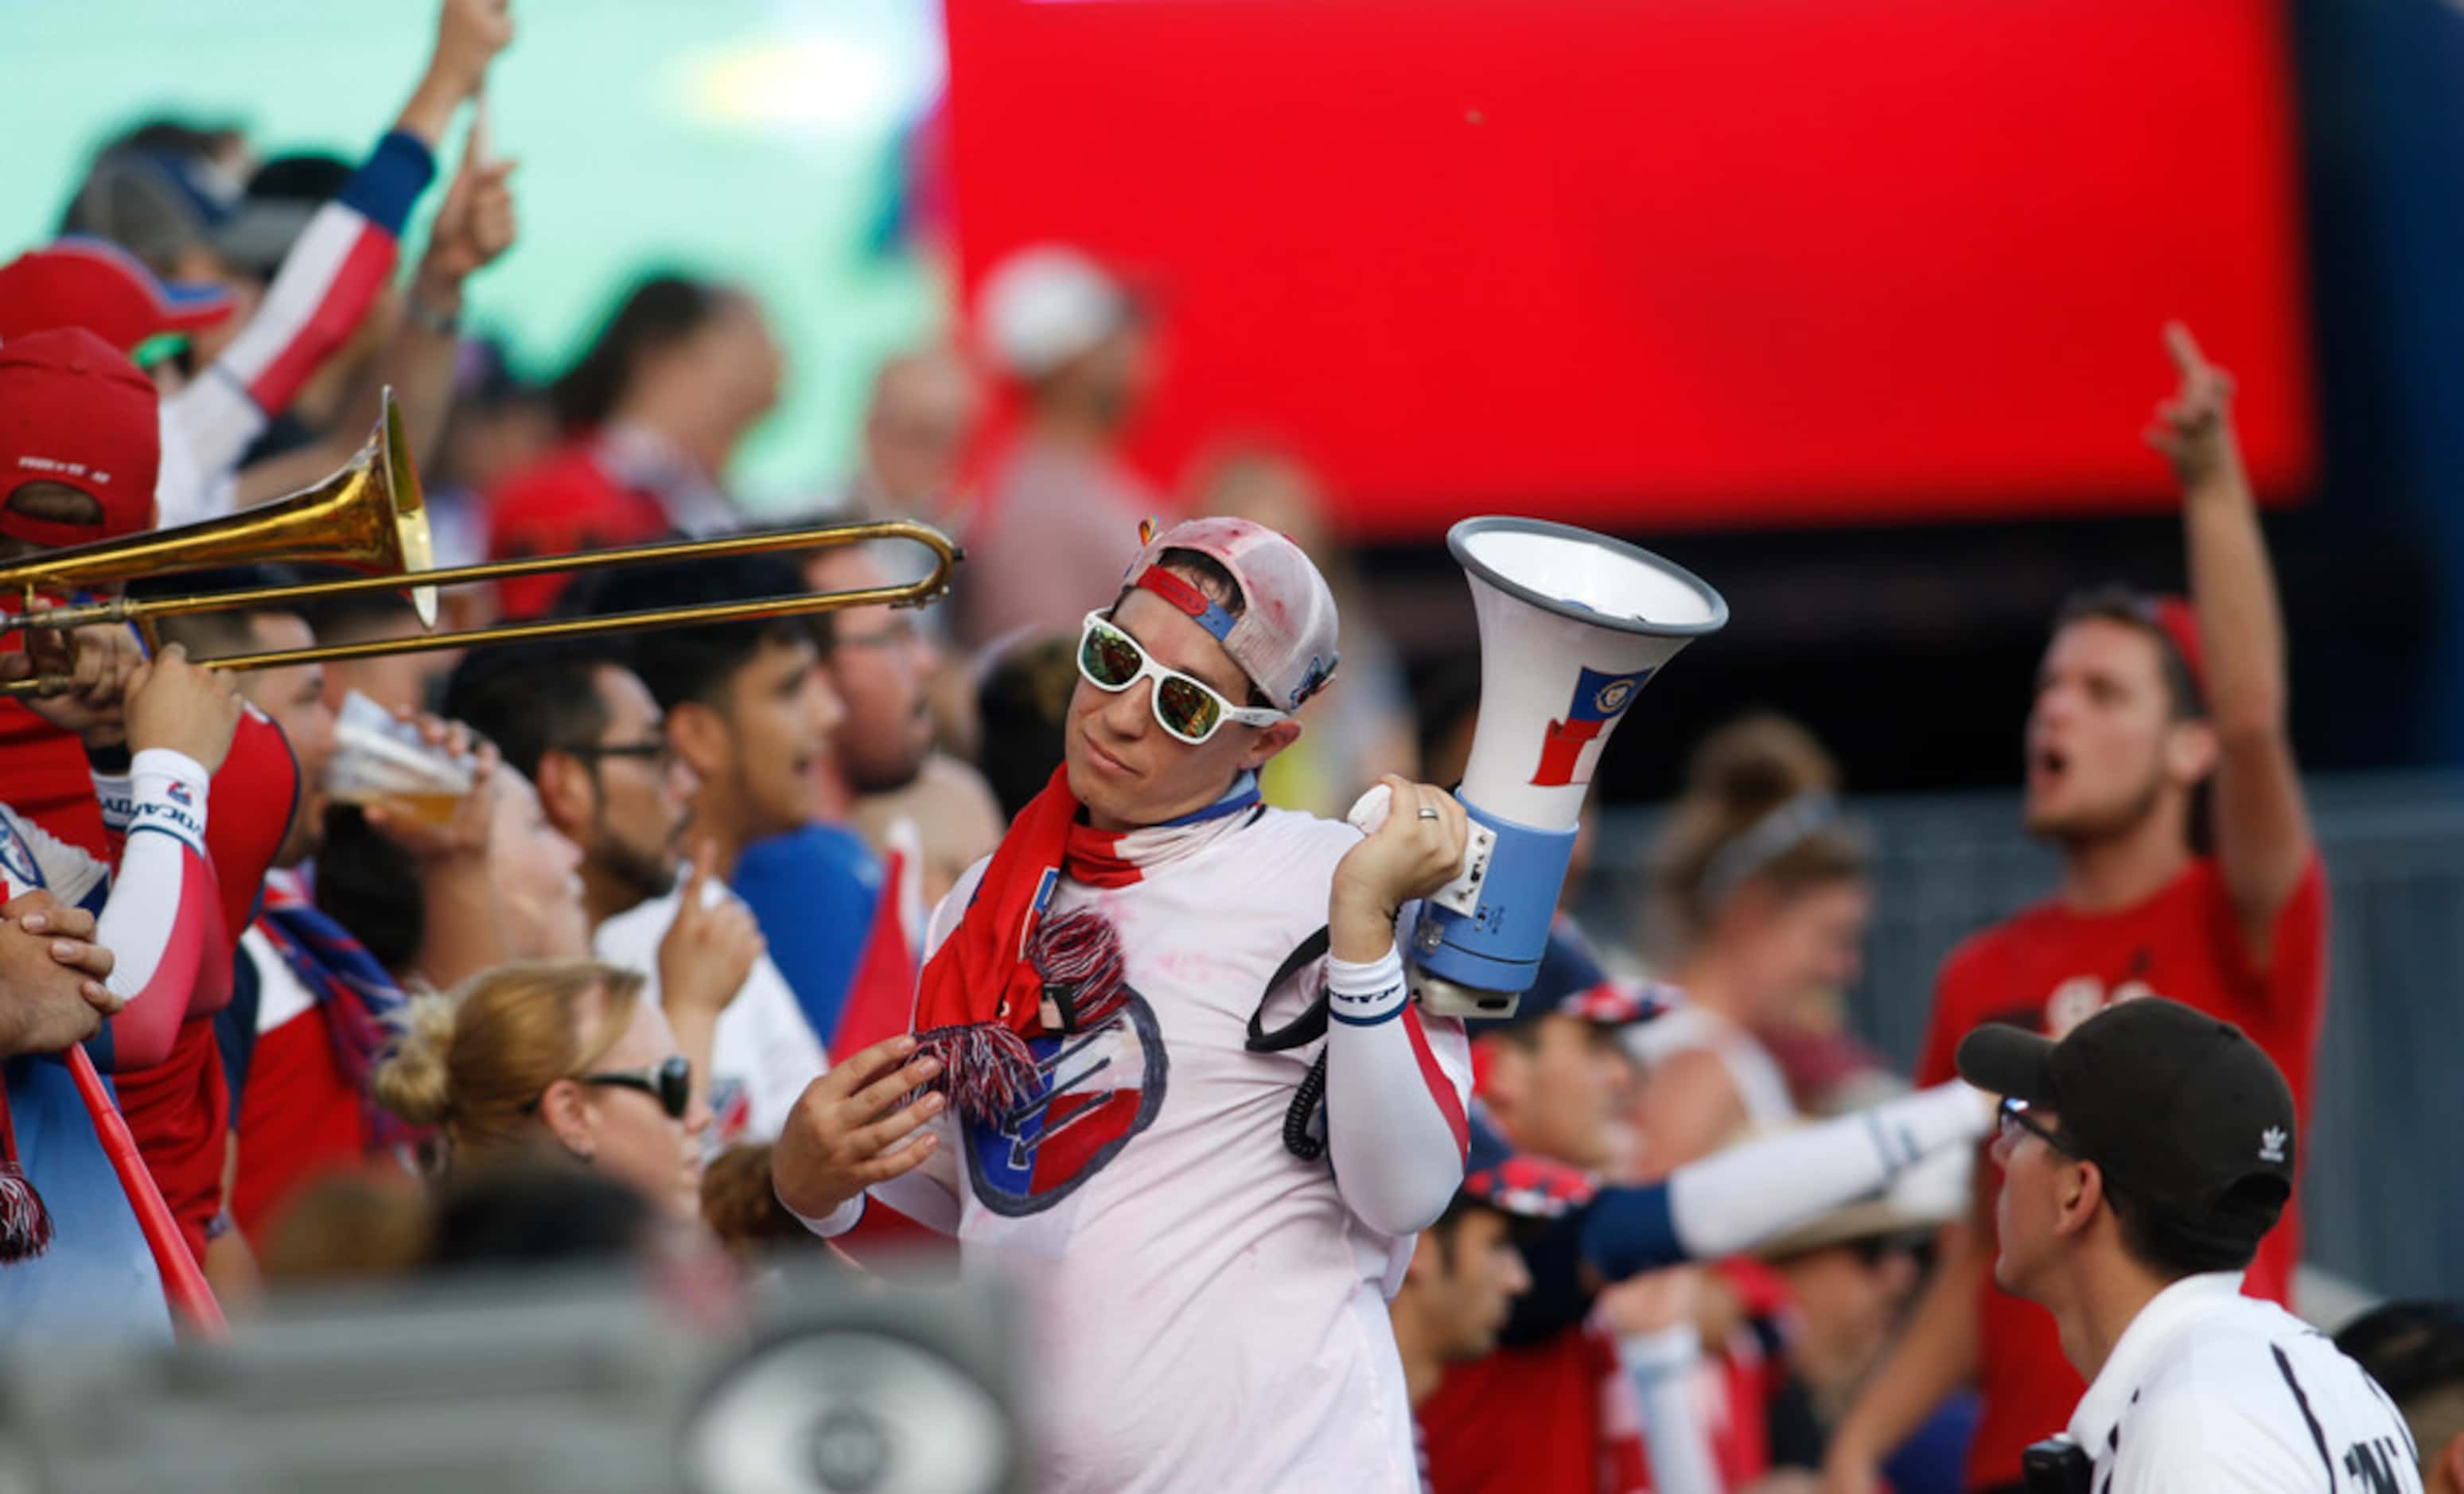 FC Dallas fans voiced their support in the stands during first half action against New York...